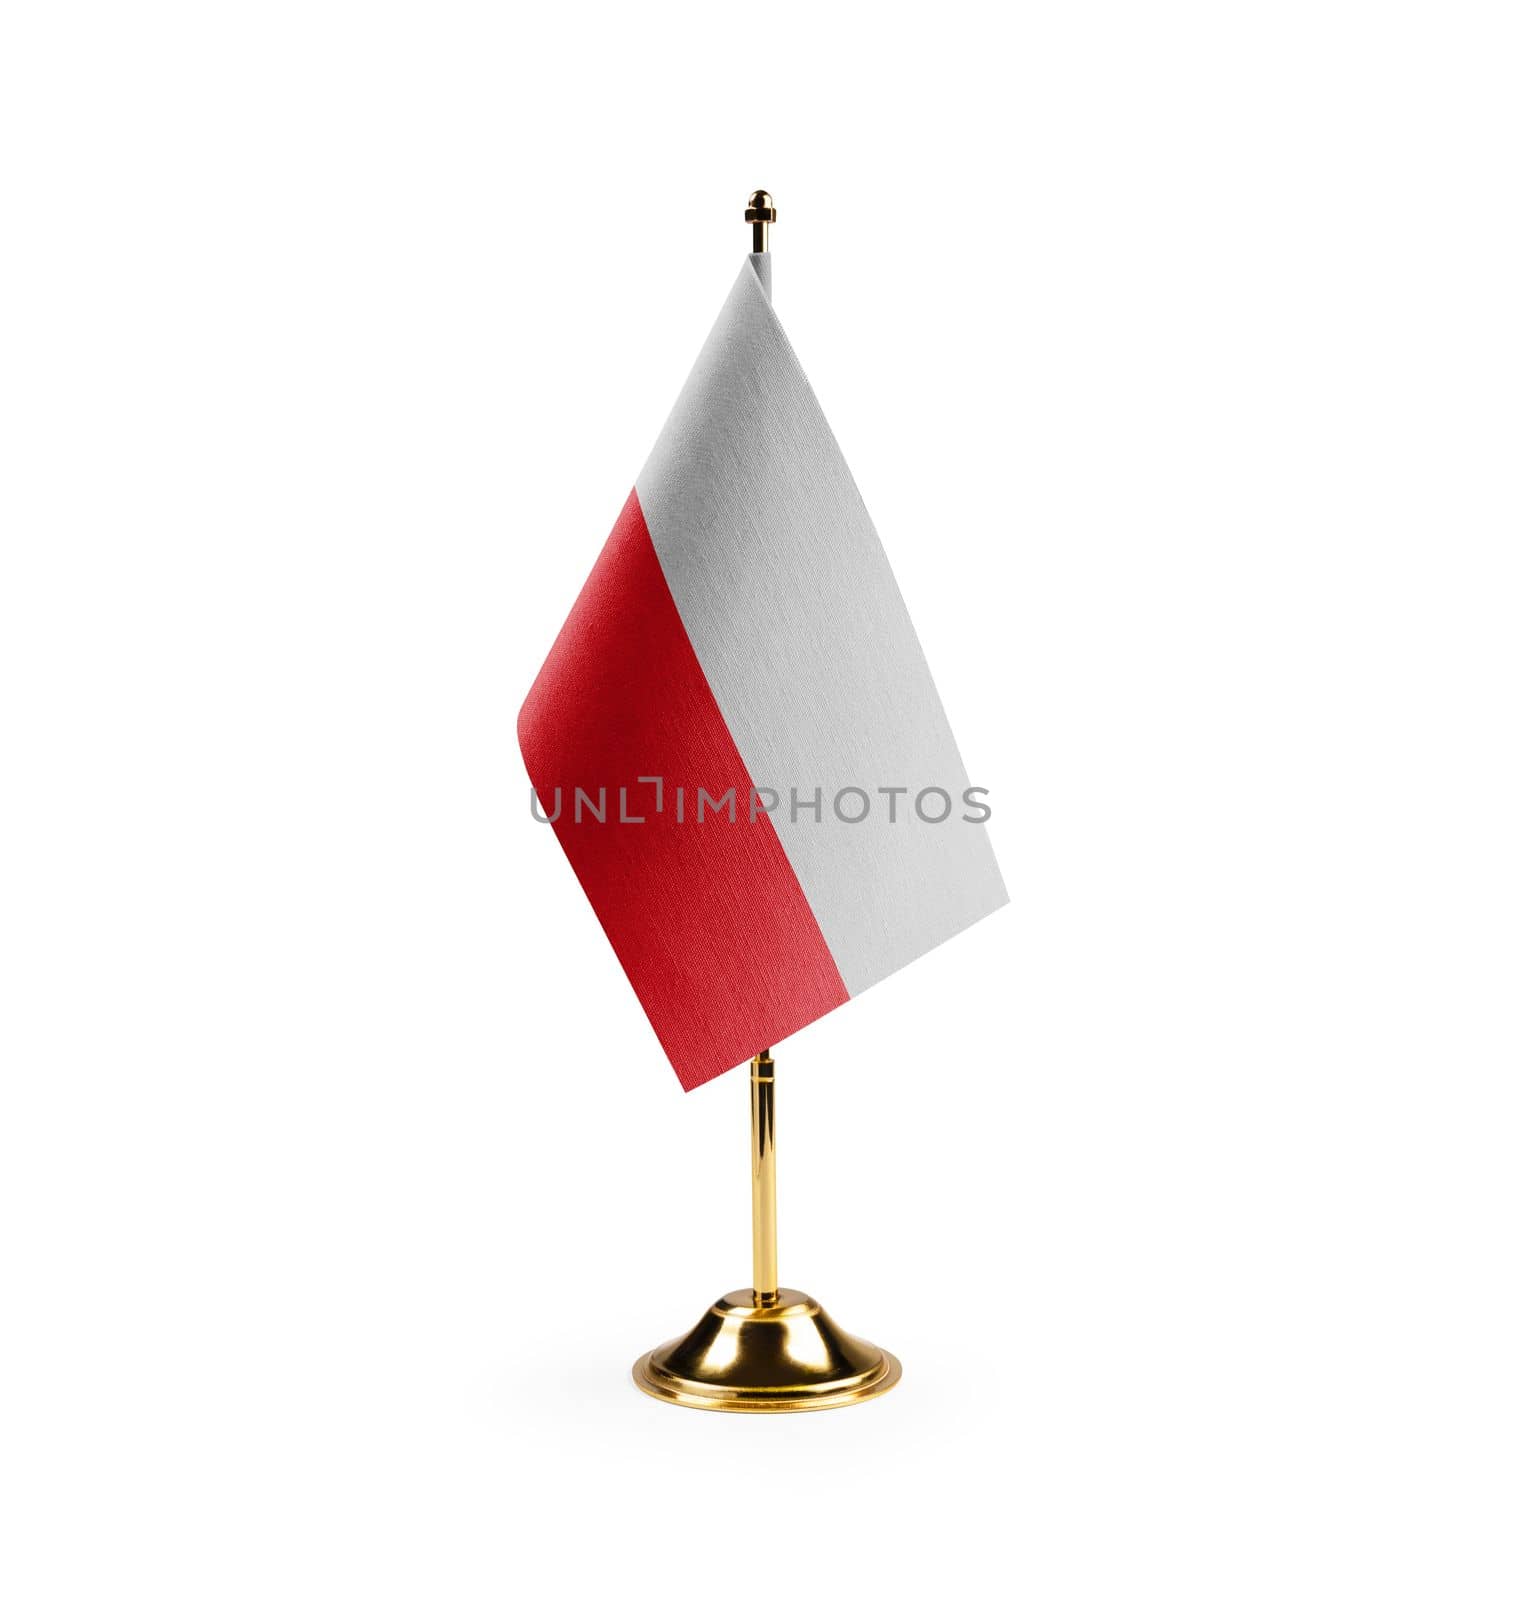 Small national flag of the Poland on a white background.